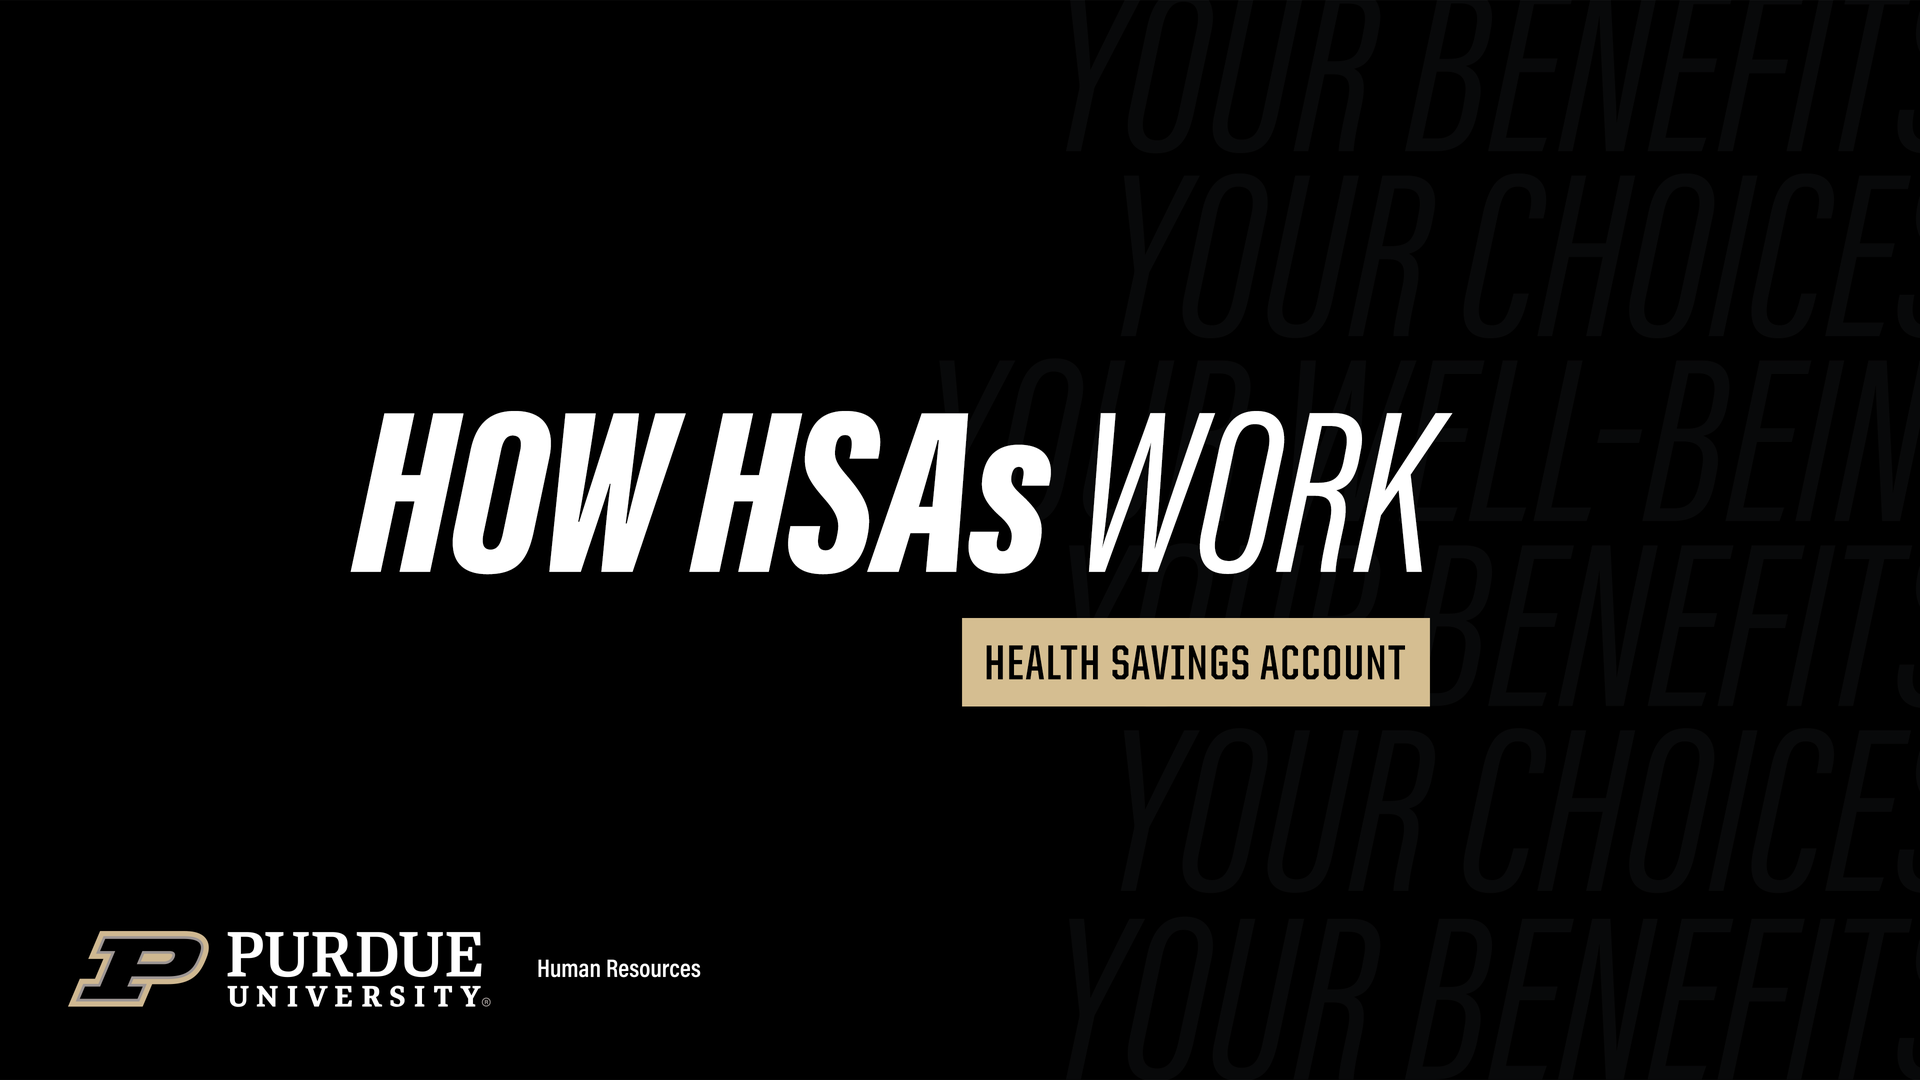 How HSA works